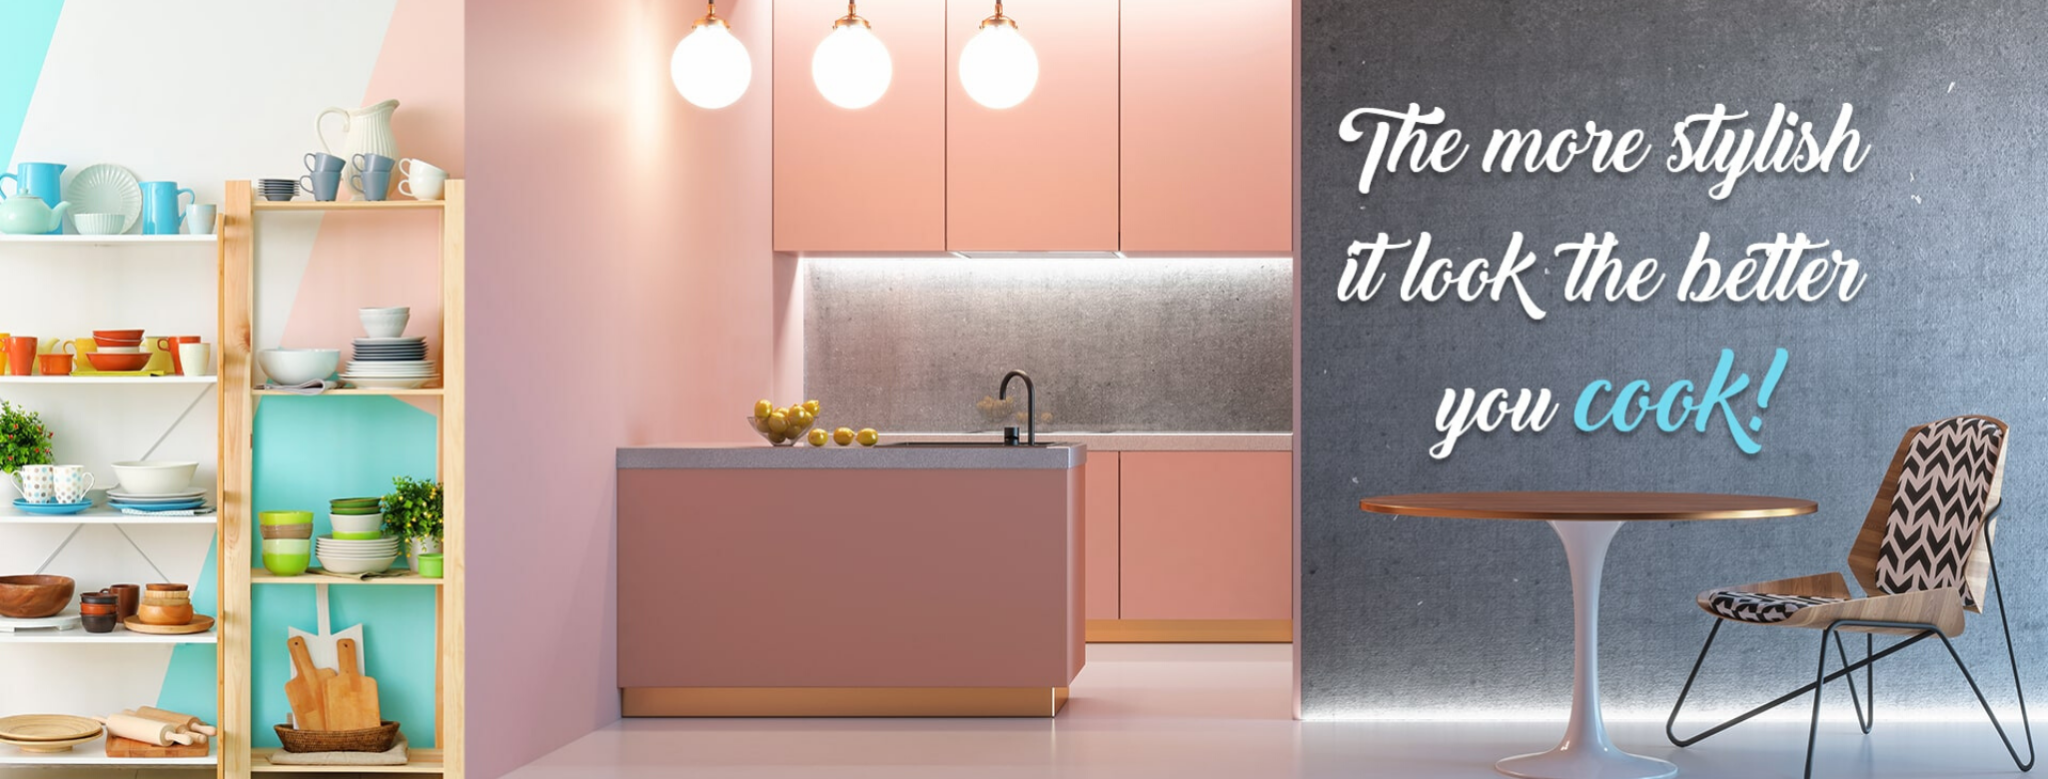 4 Common Myths about Luxury Kitchen Designs